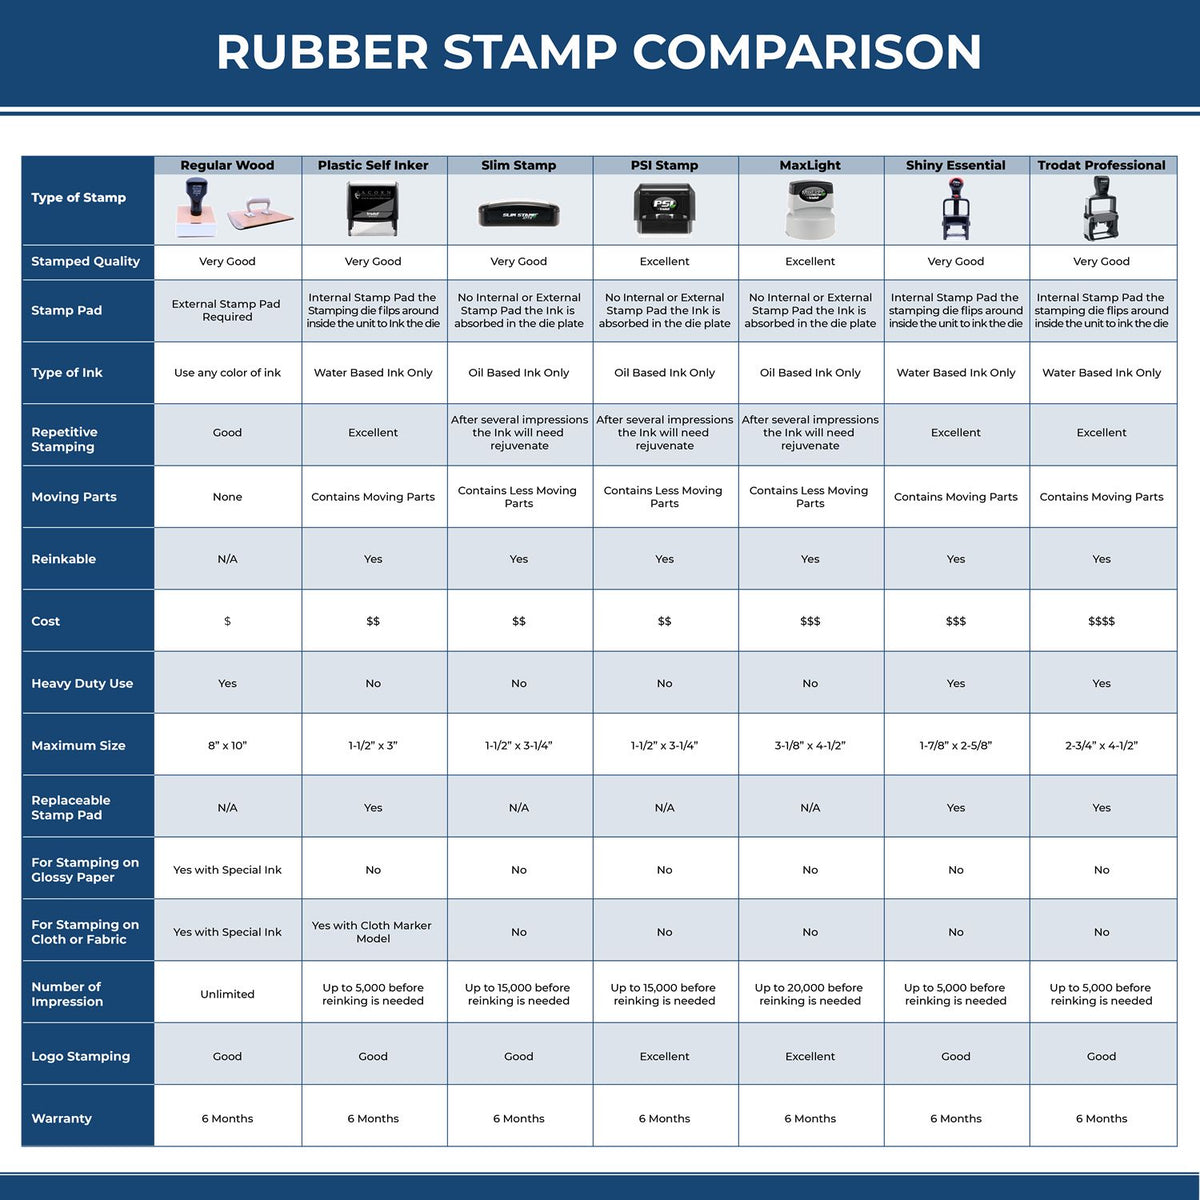 A comparison chart for the different types of mount models available for the Premium MaxLight Pre-Inked Maryland Landscape Architects Stamp.